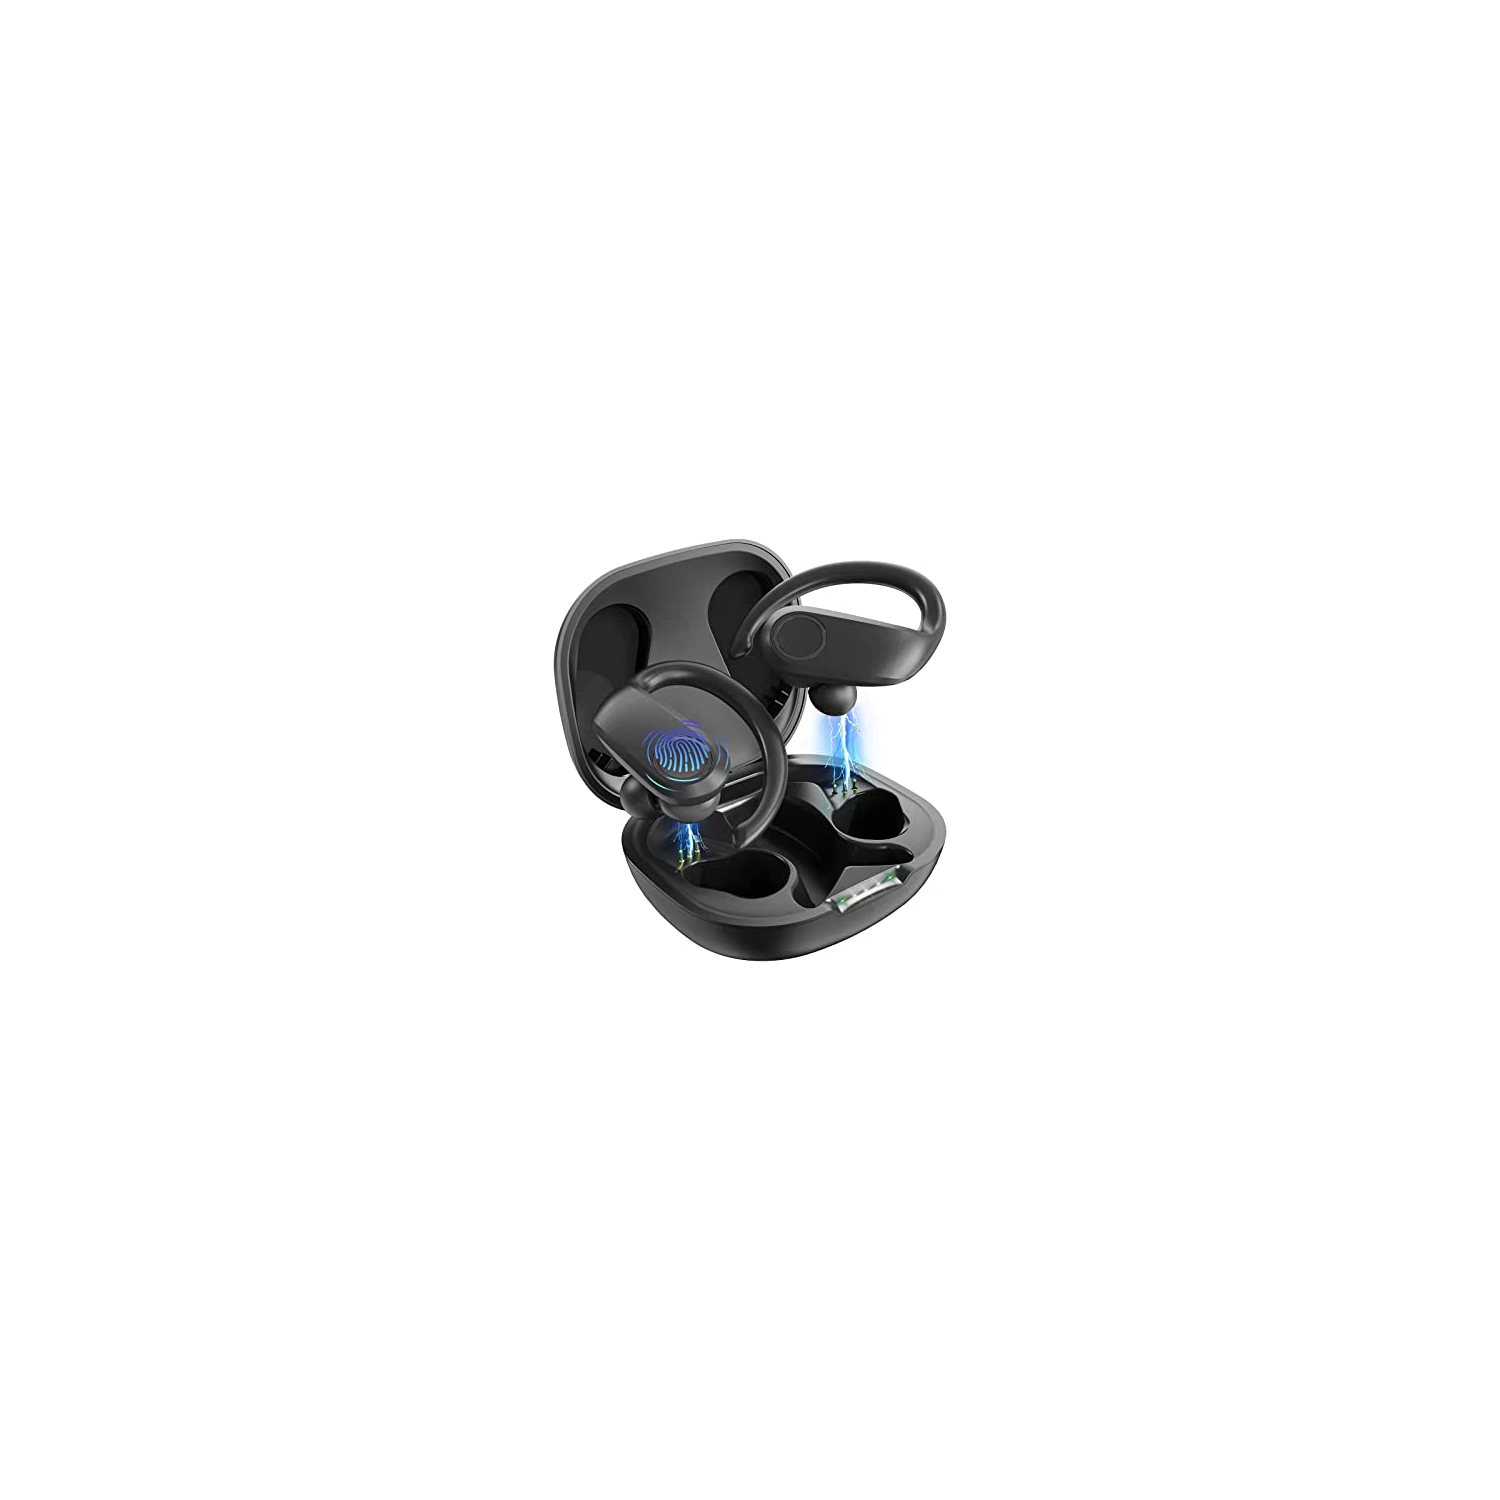 Wireless Earbud, Bluetoth 5.0 Headphones with CVC 8.0 Noise Cancelling, Deep Stereo Bass, Built in Mic and 48H Playtime, Sports Earhooks Running Earphones with IPX7 Waterproof for